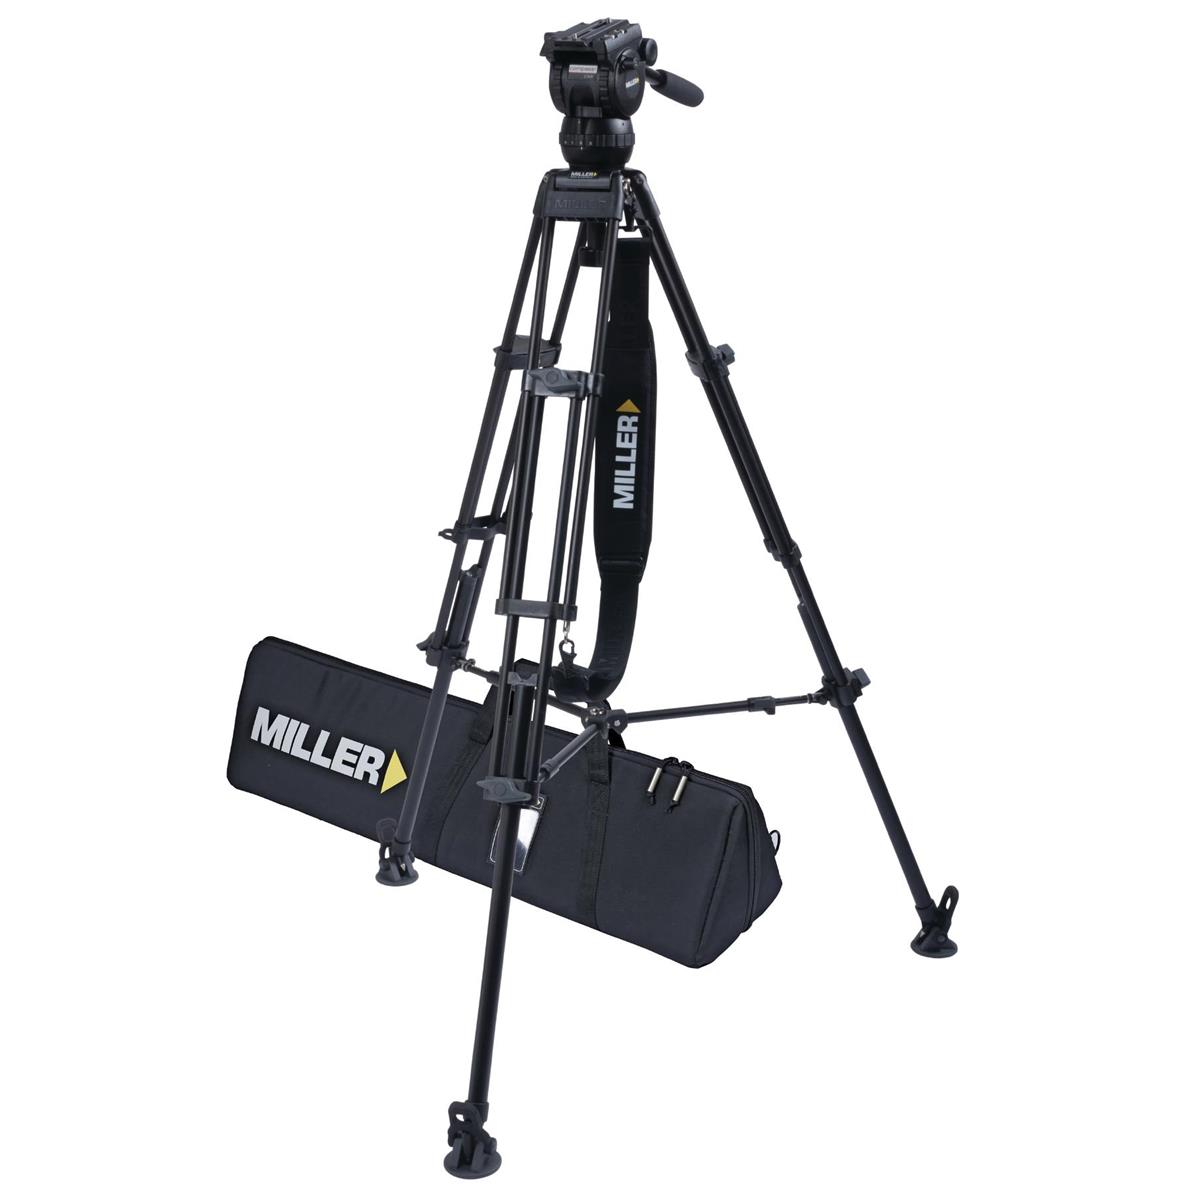 Image of Miller CX6 Fluid Head with Toggle 3-Section Al Tripod and Above Ground Spreader